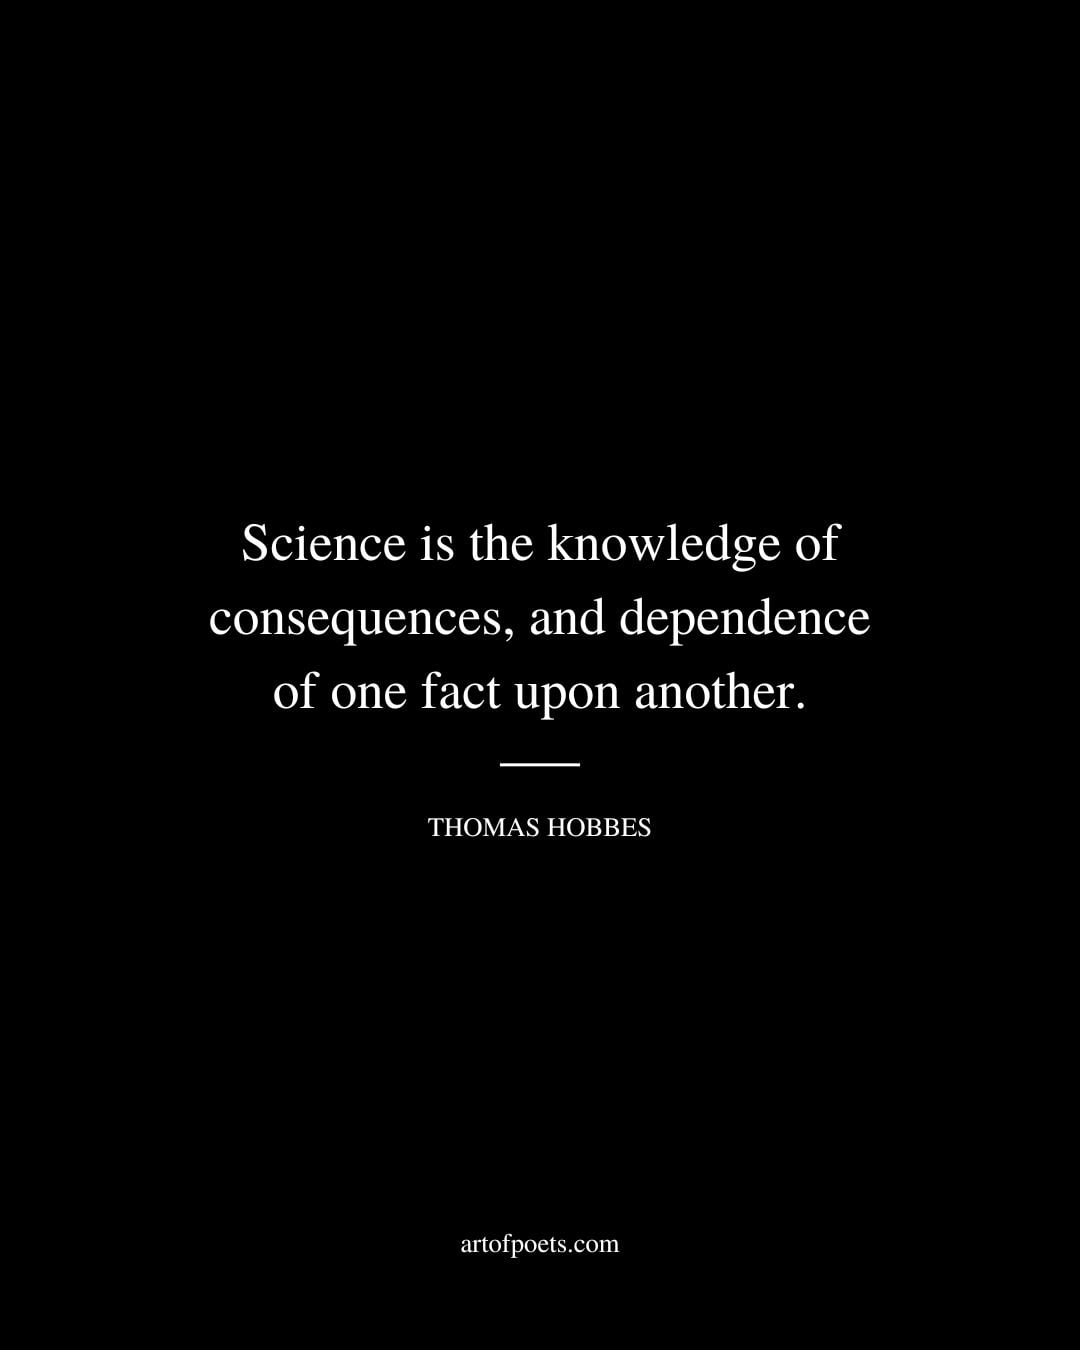 Science is the knowledge of consequences and dependence of one fact upon another